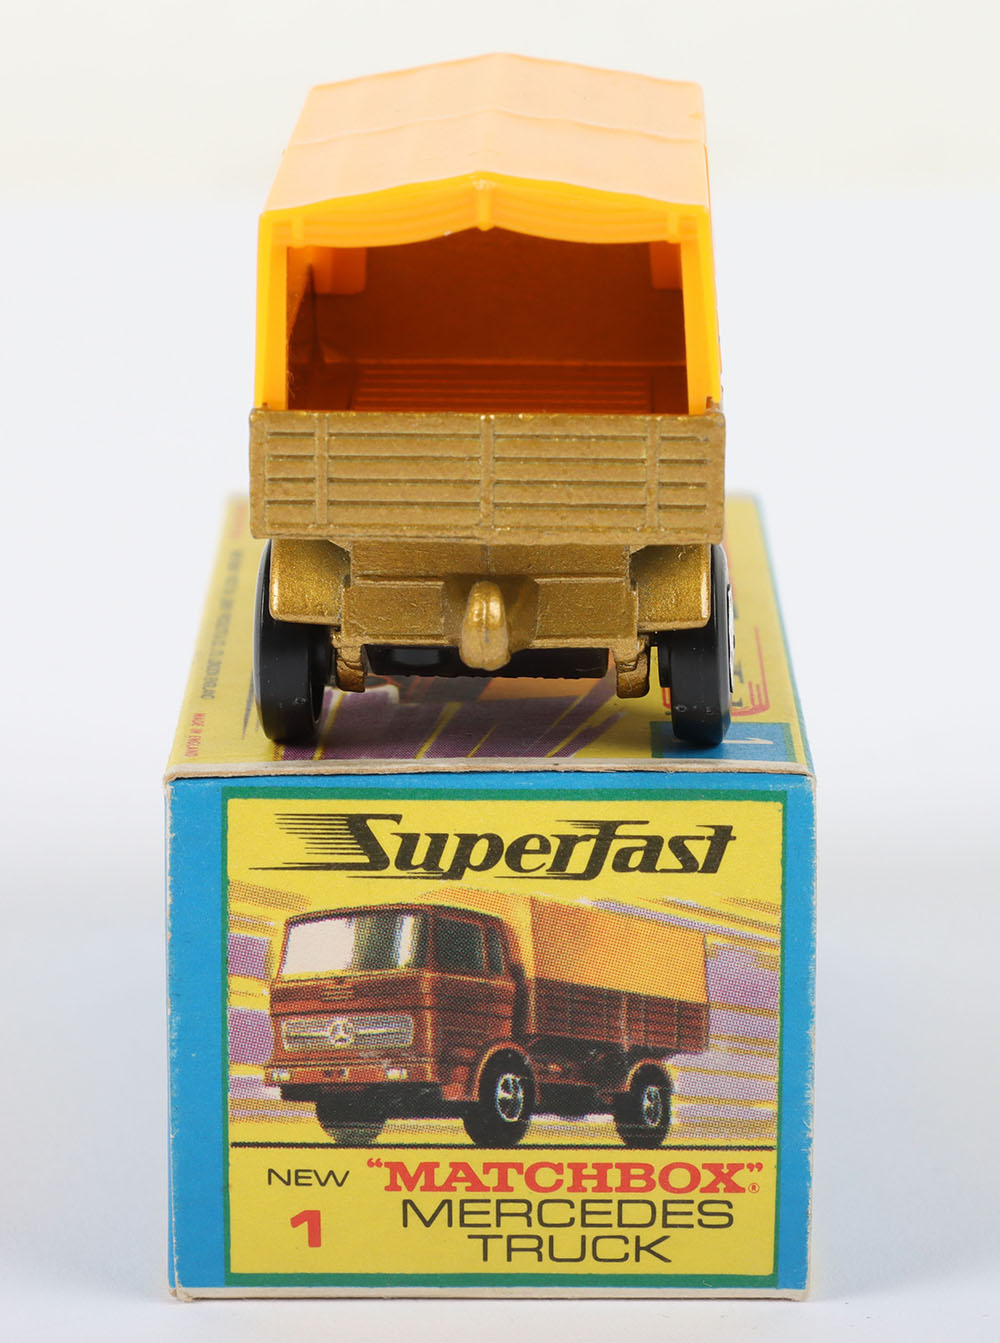 Matchbox Lesney Superfast MB-1 Mercedes Truck with THIN 4-Spoke wheels - Image 4 of 5